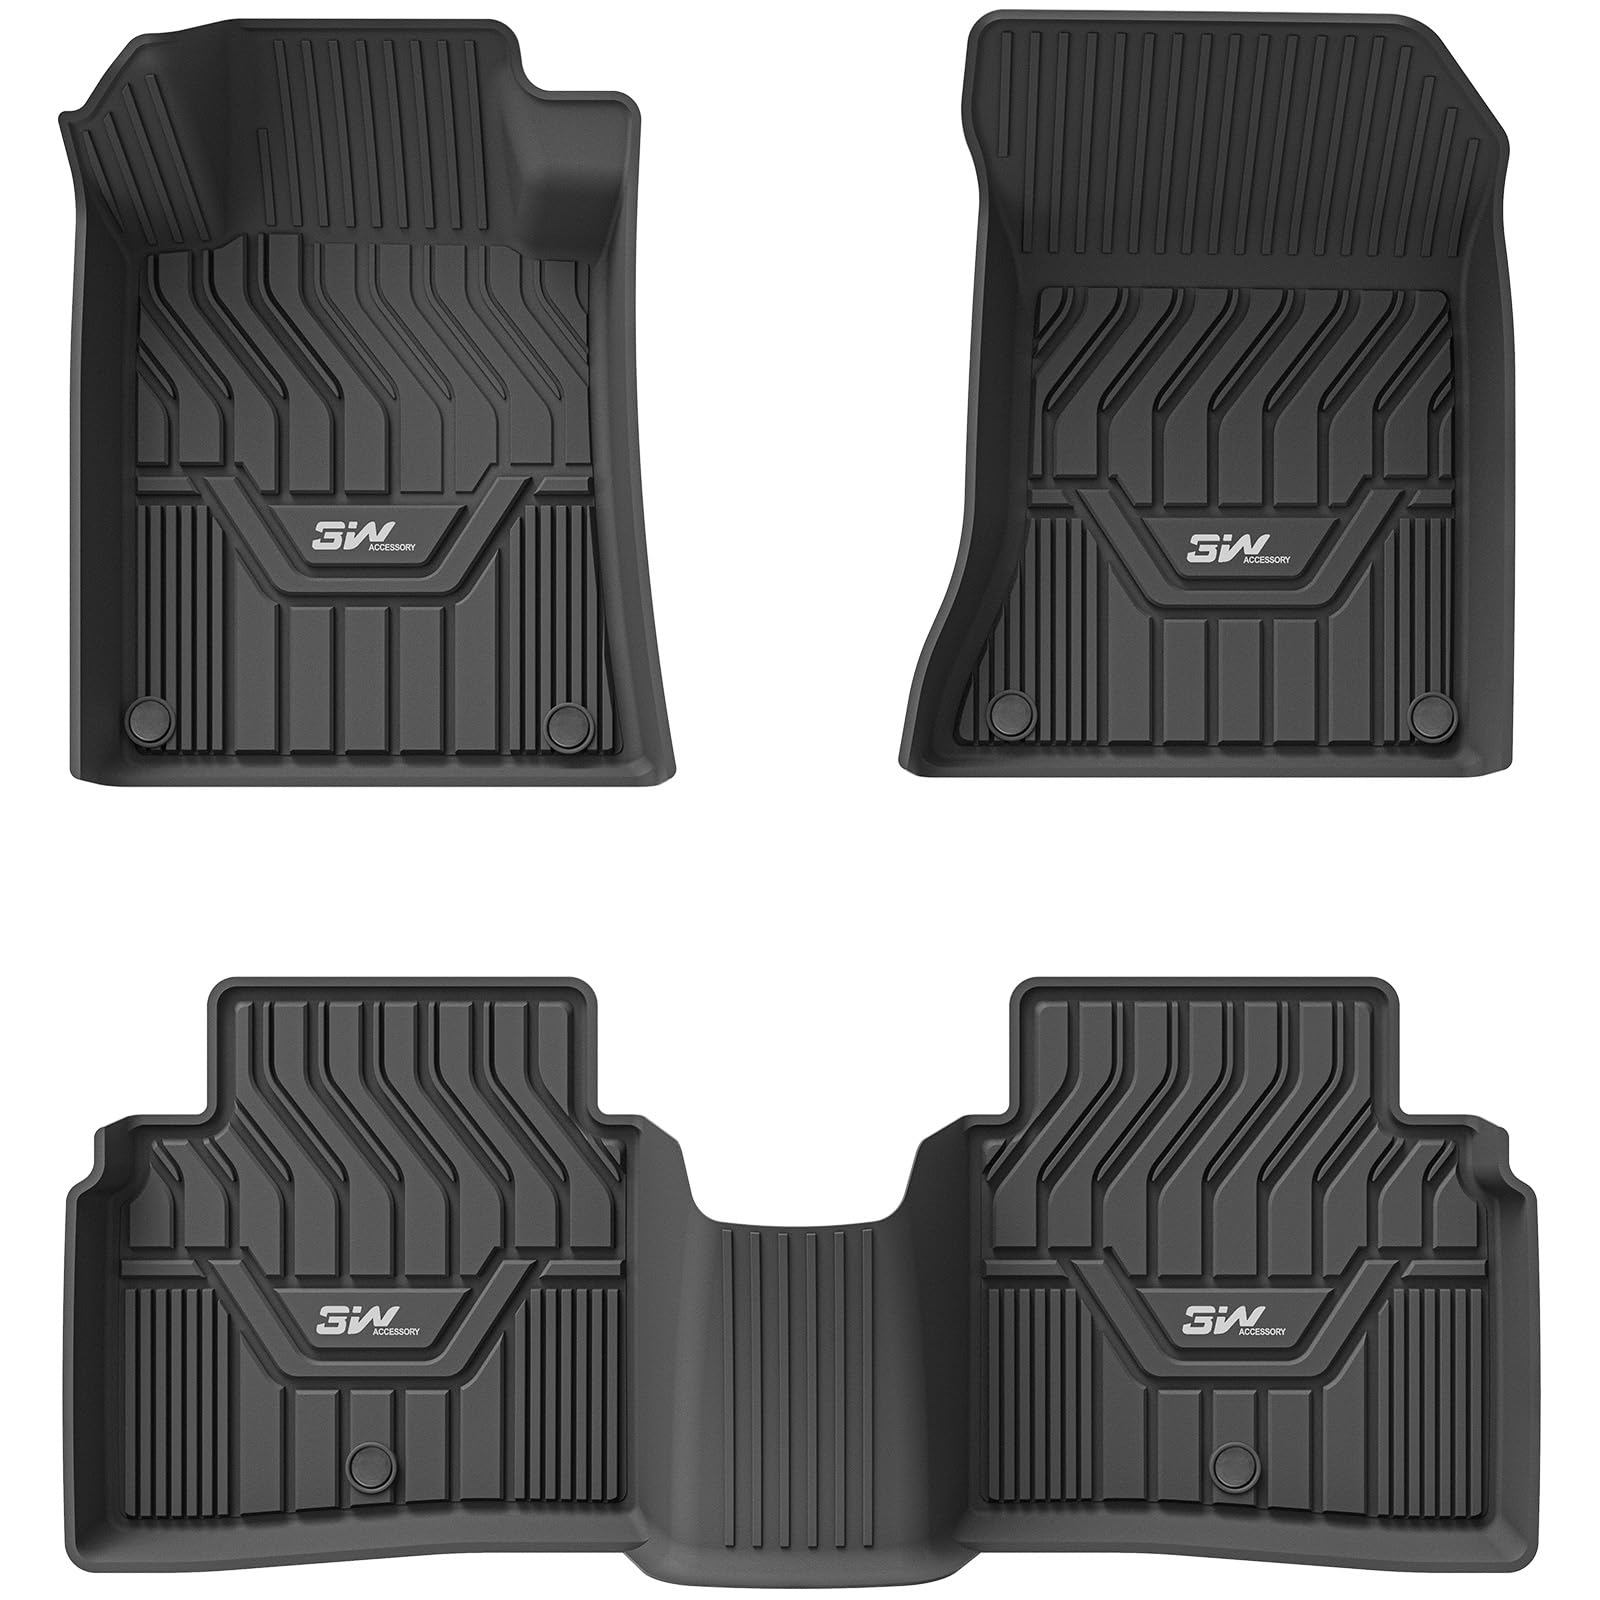 3W Nissan Altima 2019-2024 Custom Floor Mats TPE Material & All-Weather Protection Vehicles & Parts 3Wliners 2019-2024 Altima 2019-2024 1st&2nd Row Mats